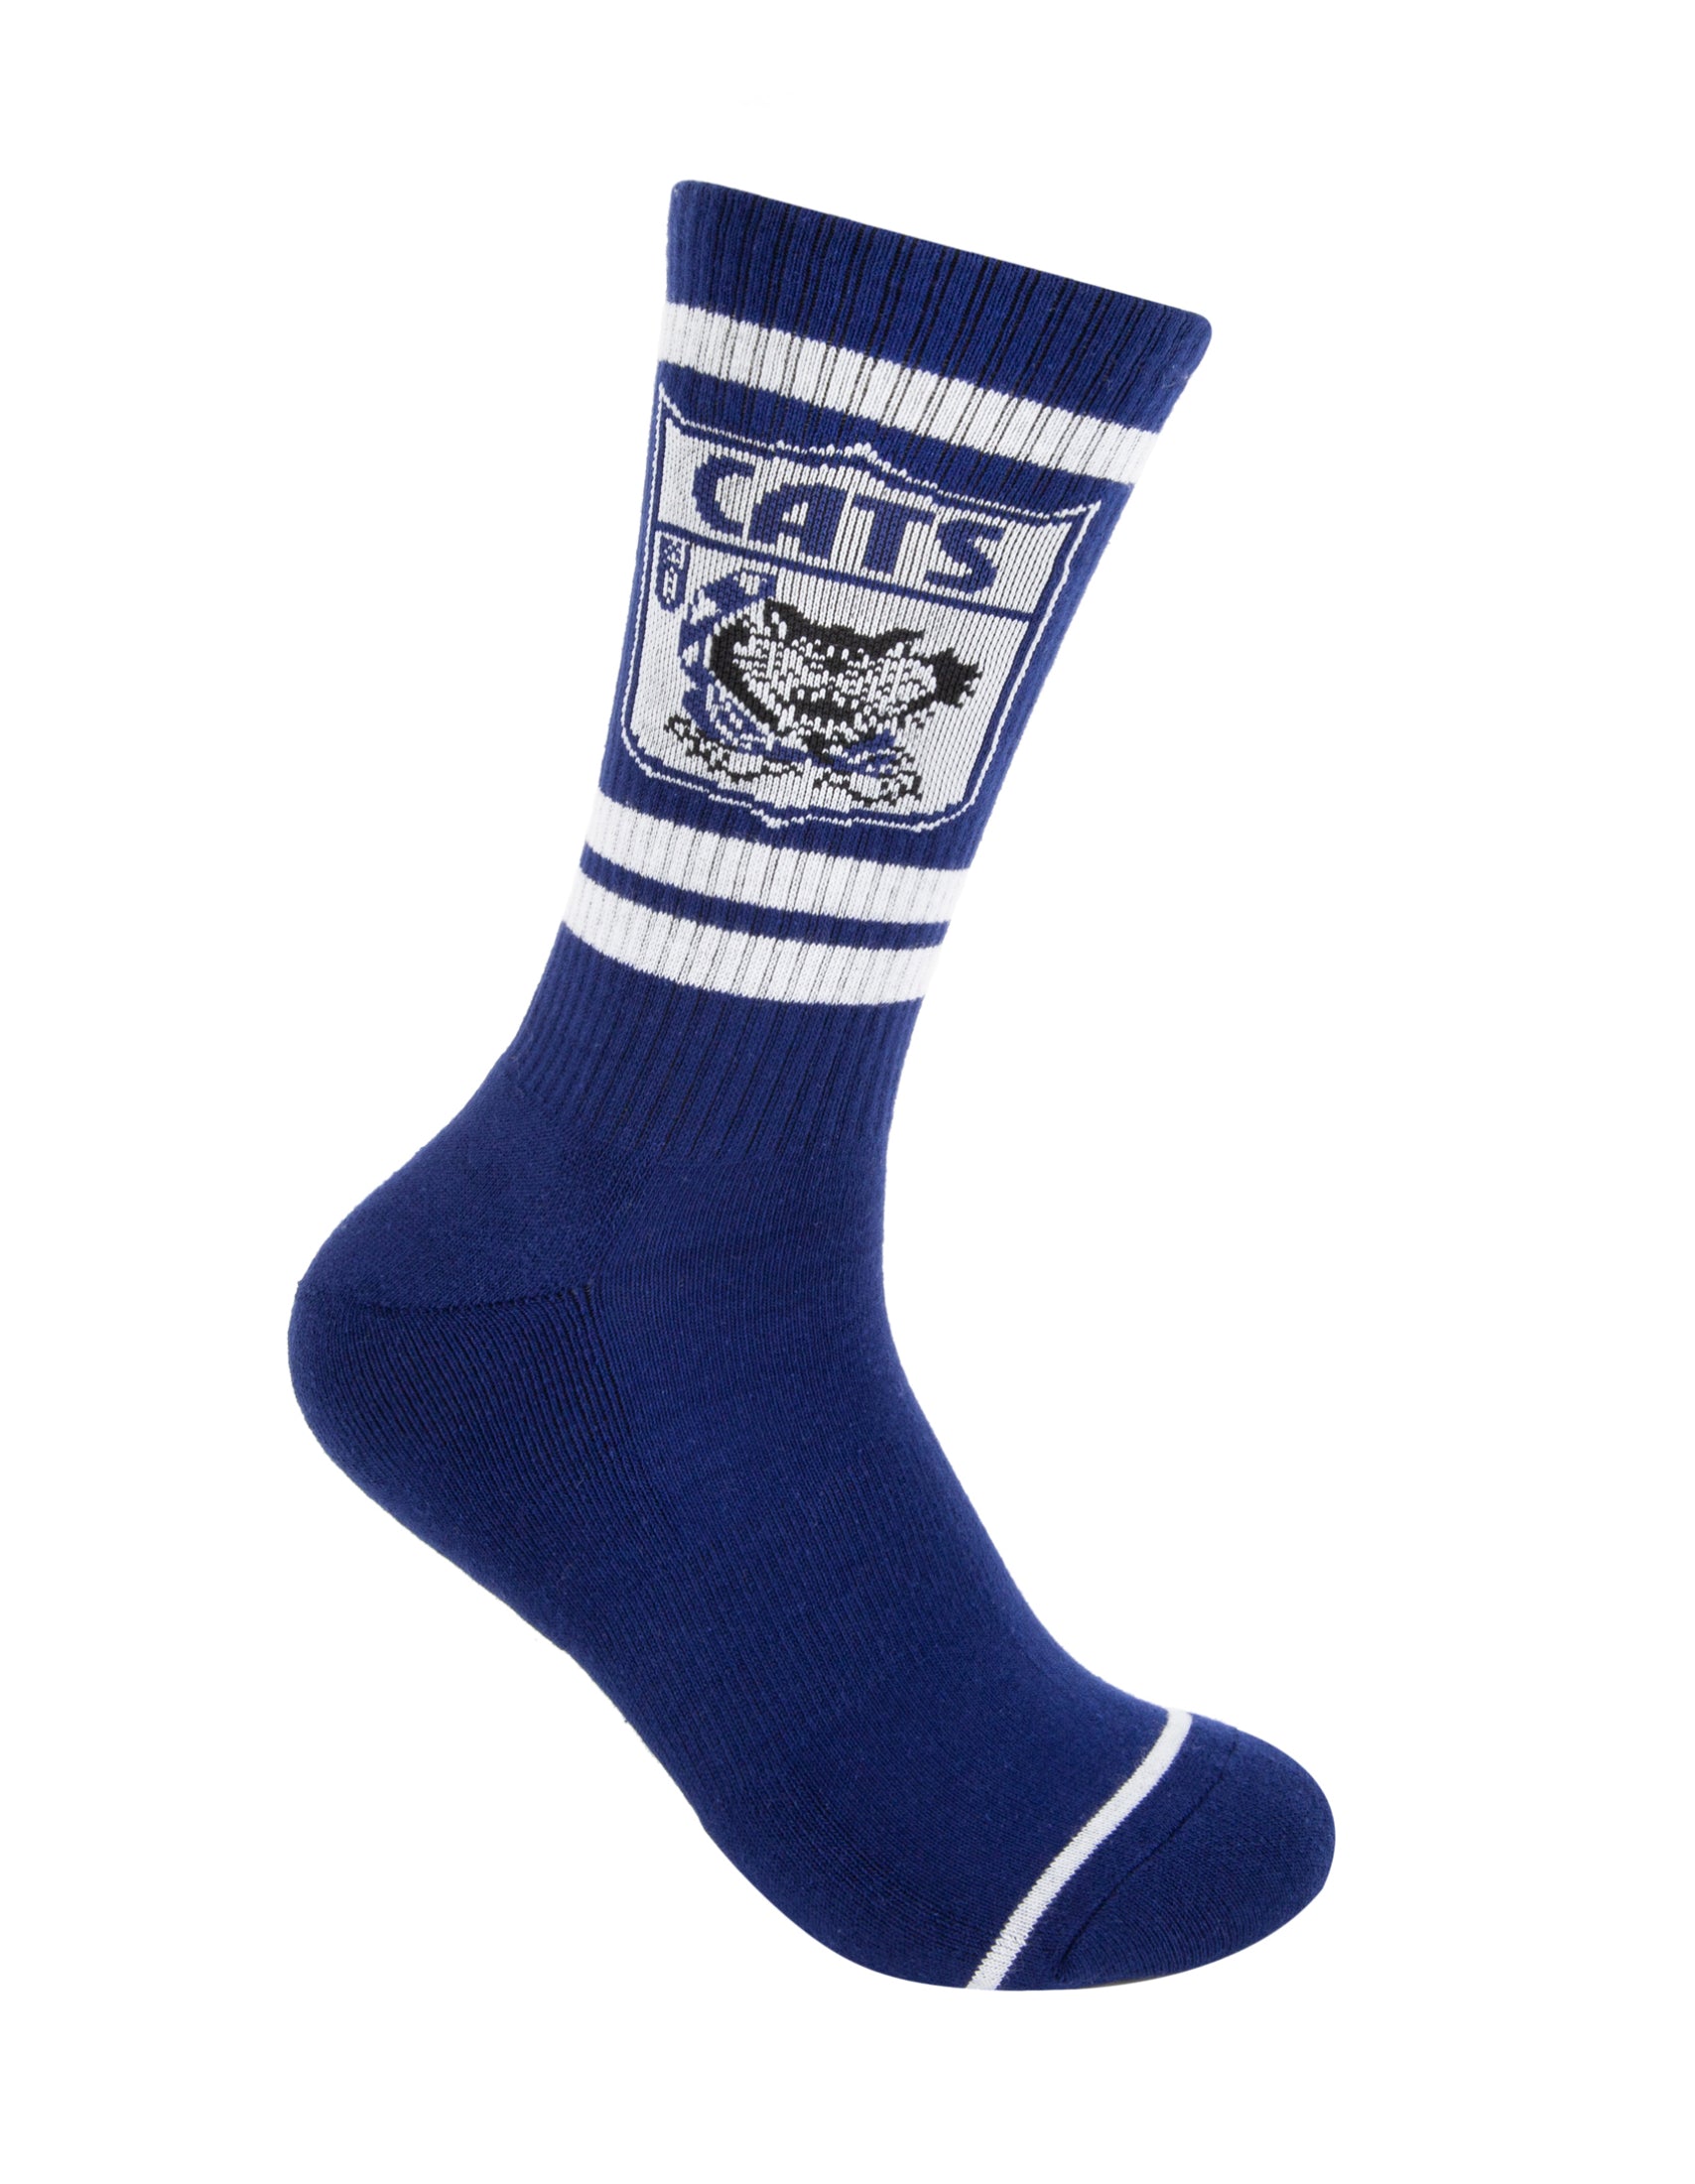 Geelong Cats Icons Sneaker Socks 2 Pack